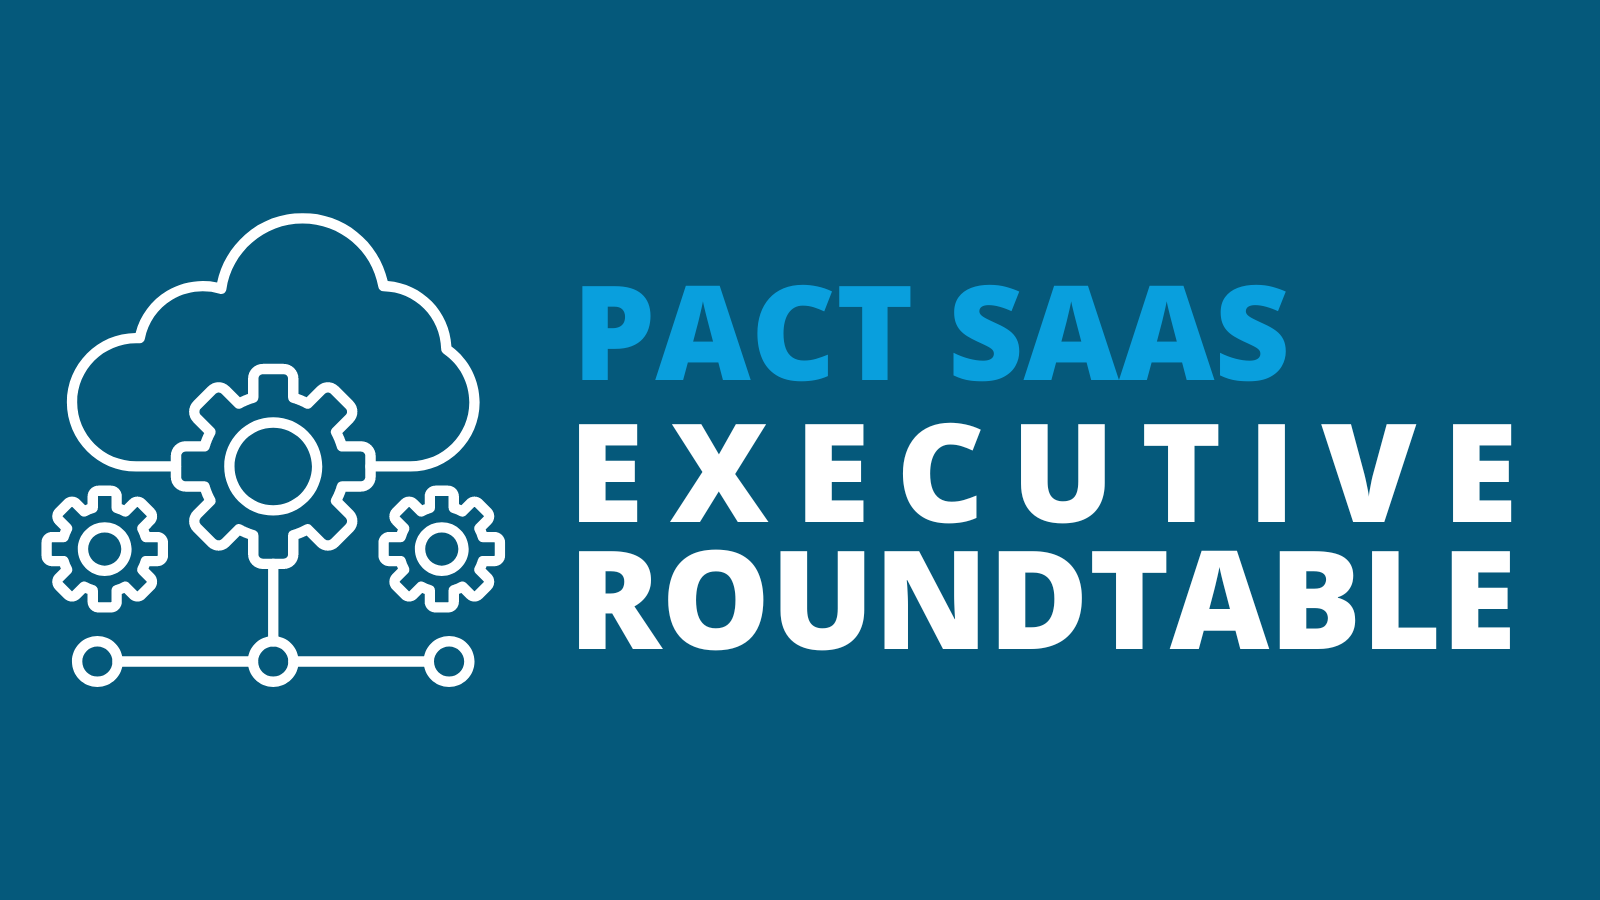 Shares the logo of the PACT SaaS Executive Roundtable series